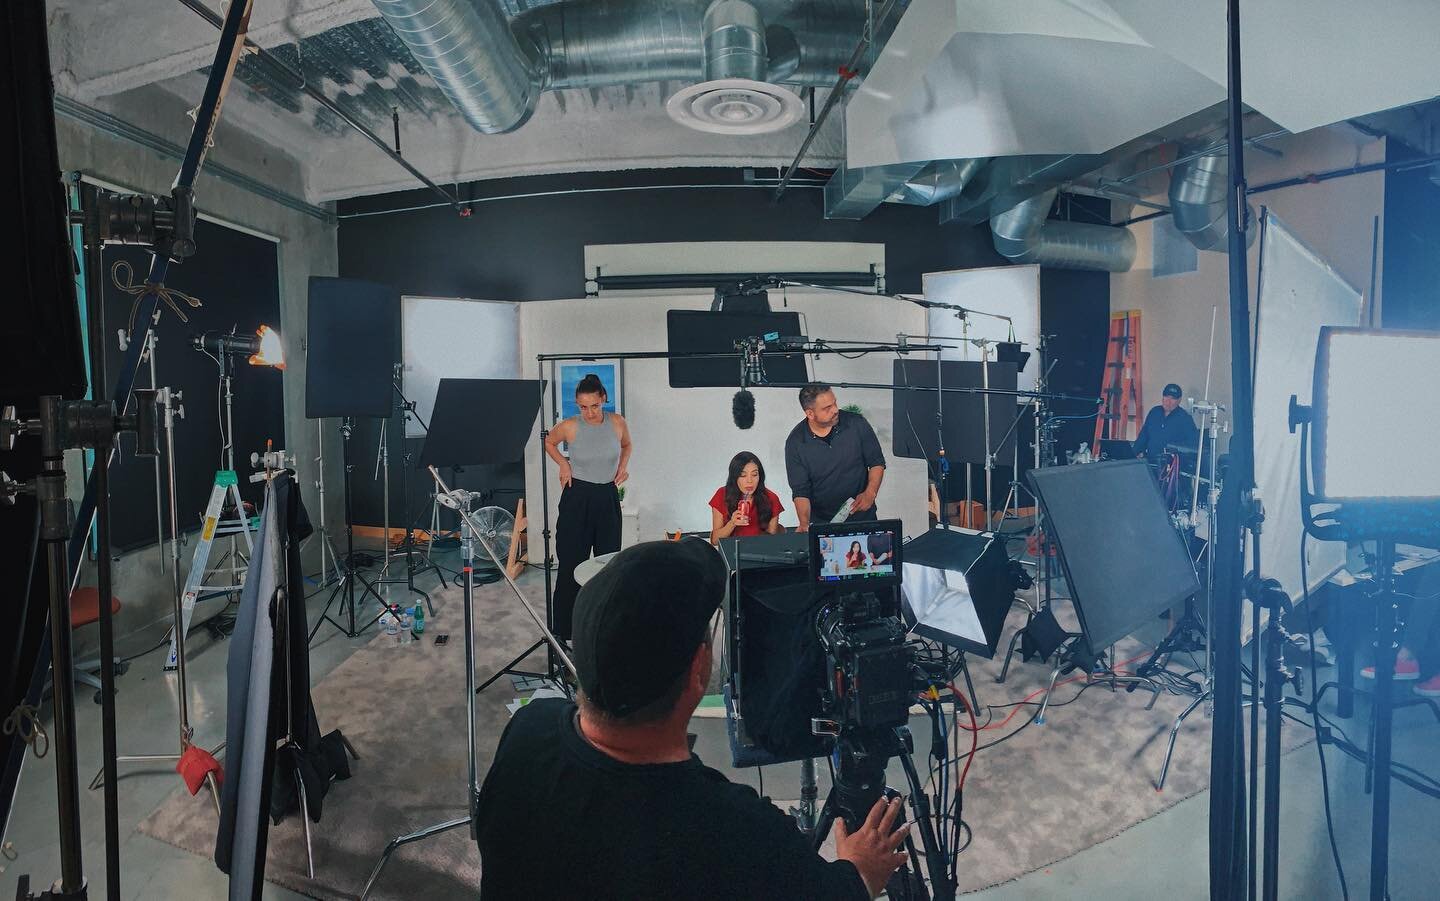 That&rsquo;s a wrap! It was a pleasure shooting with the Red Gemini and a few of our most trusted fixtures from @arri @litepanels @reddigitalcinema #sandiegovideoproduction #cinematographer